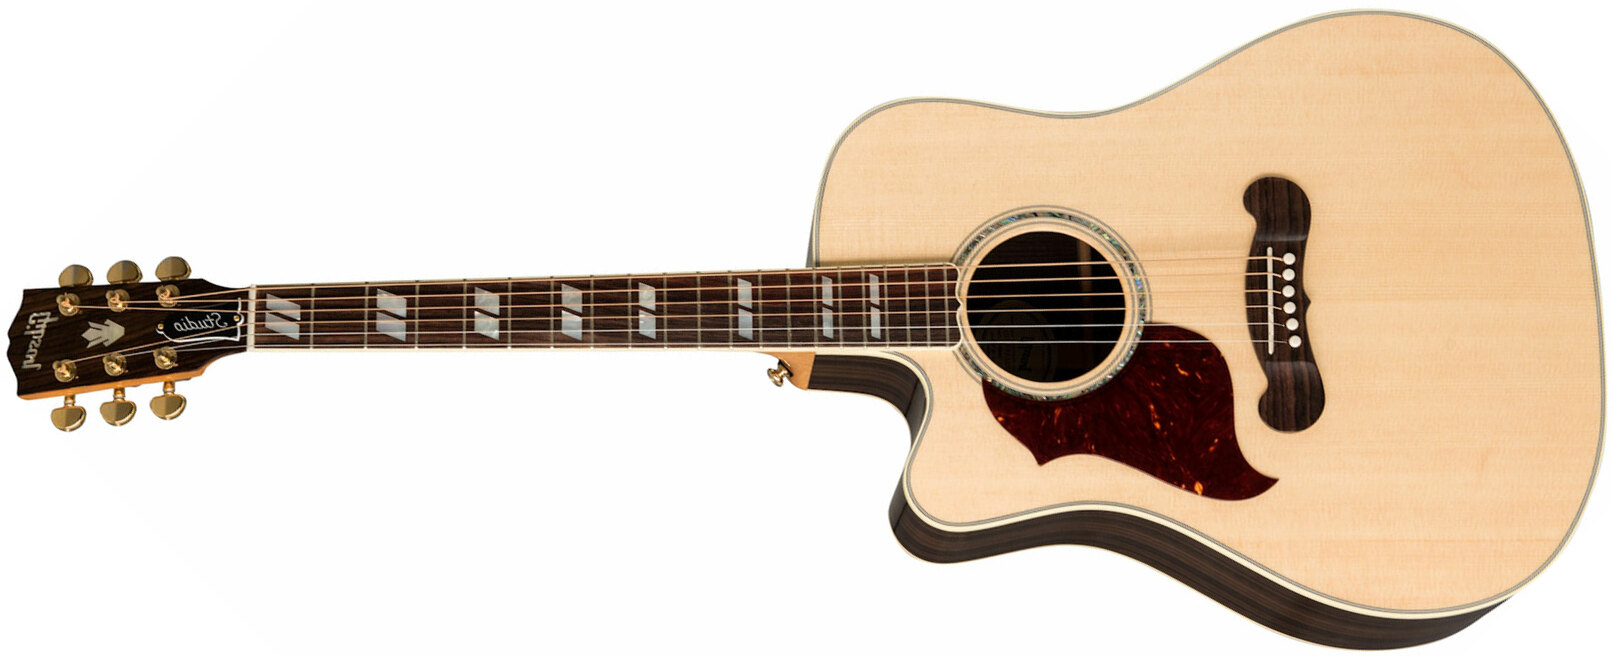 Gibson Songwriter Cutaway Lh Gaucher 2019 Dreadnought Epicea Palissandre Rw - Natural - Westerngitaar & electro - Main picture